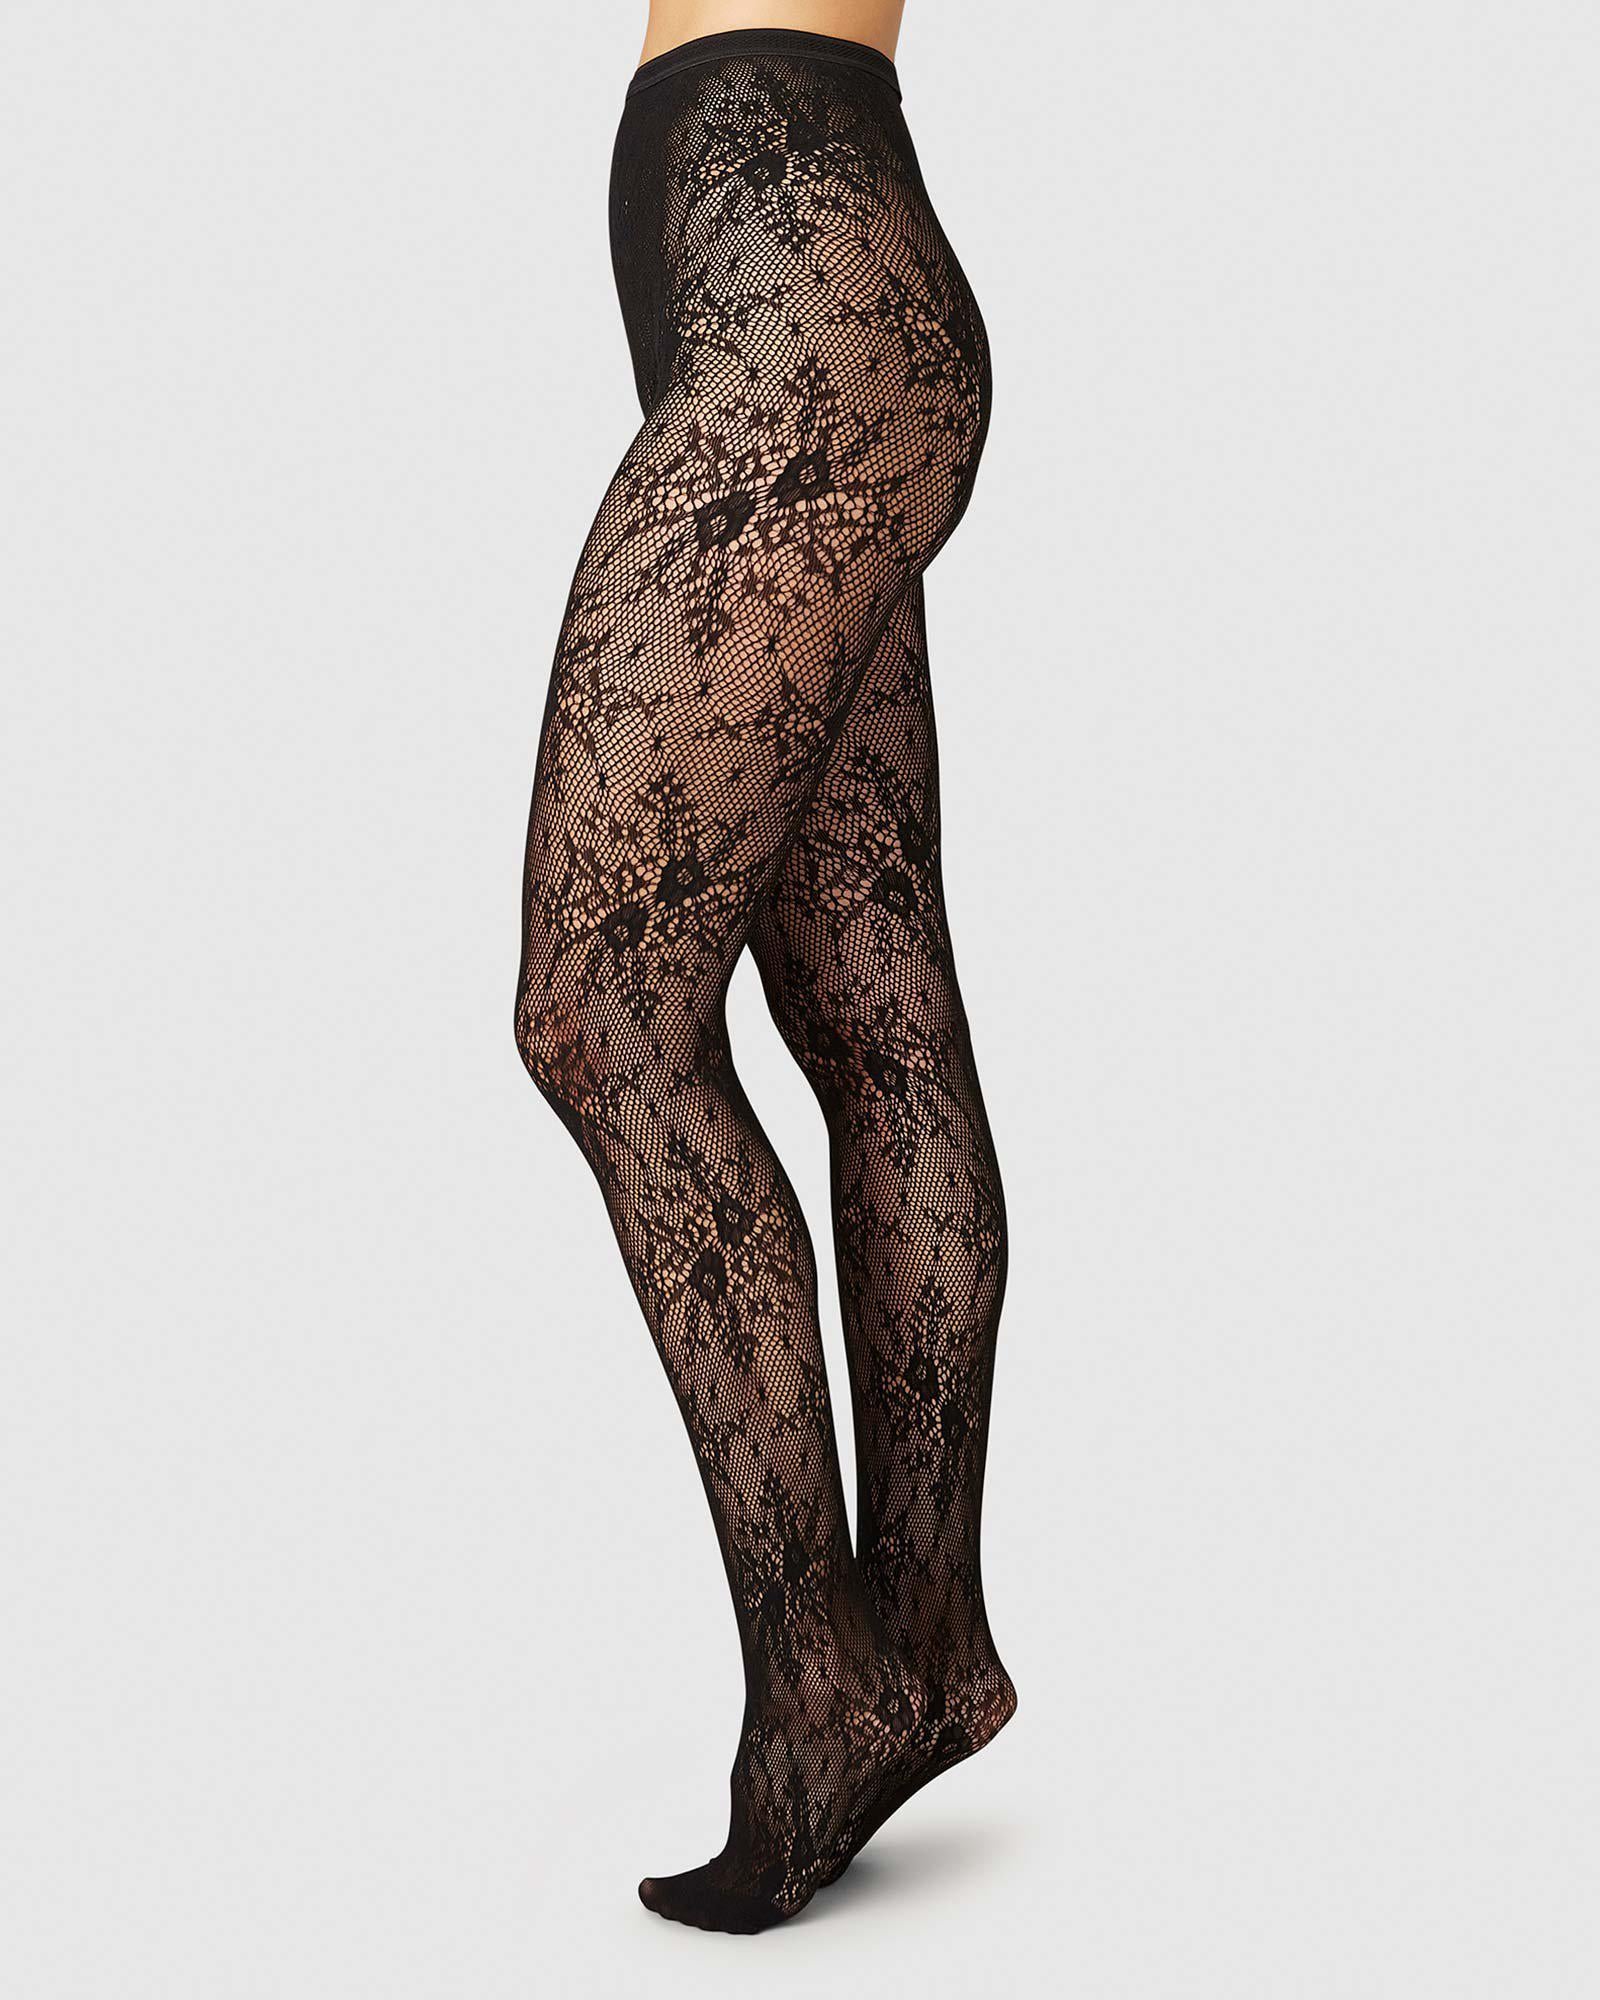 Lace tights